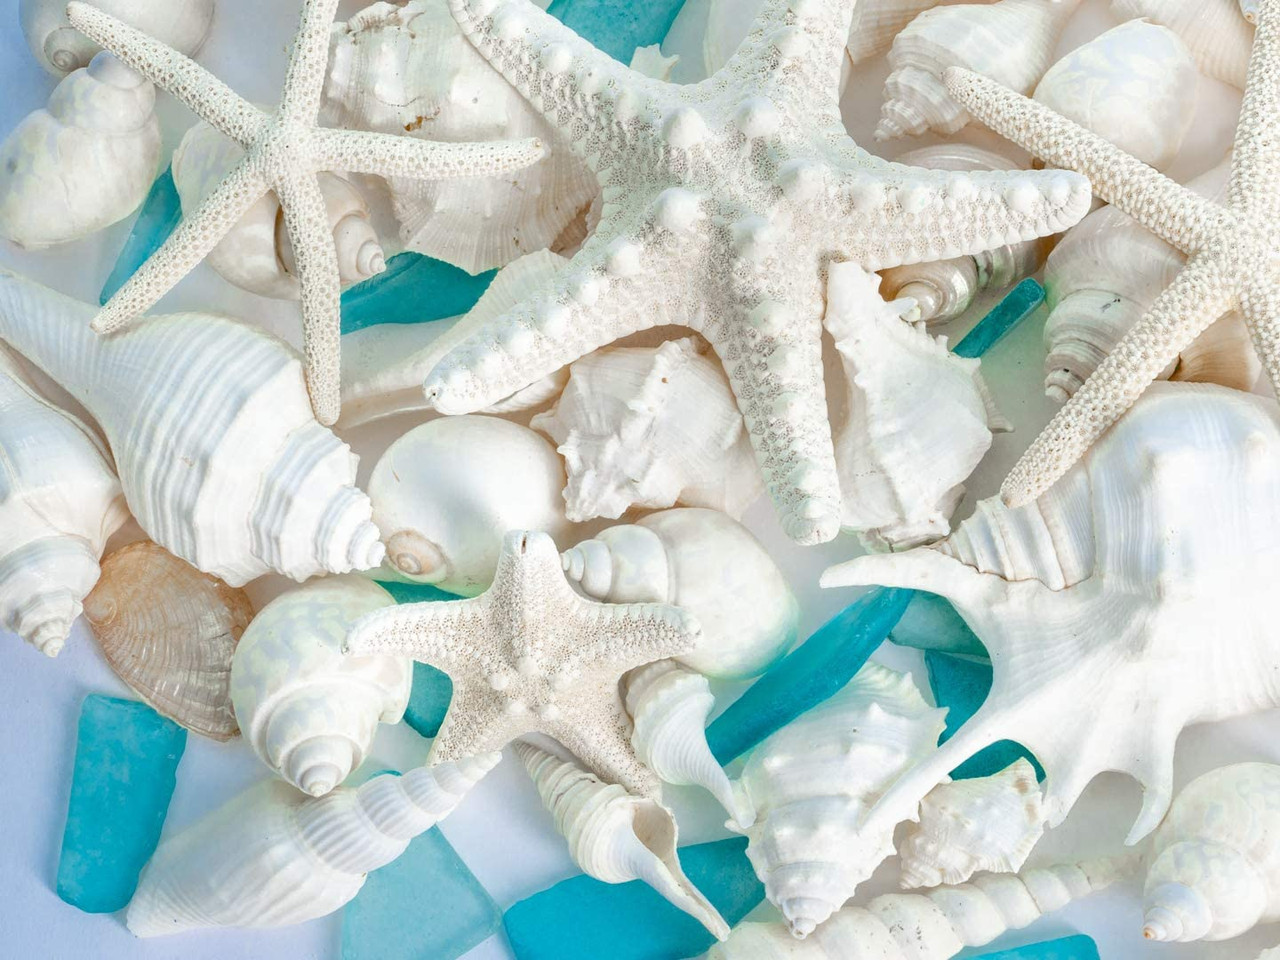 Seashell Mix 2 Pack each 1 Pound of Real Beach Seashells w/ Real Starfish &  Caribbean Blue Sea Glass for Crafts and Decor